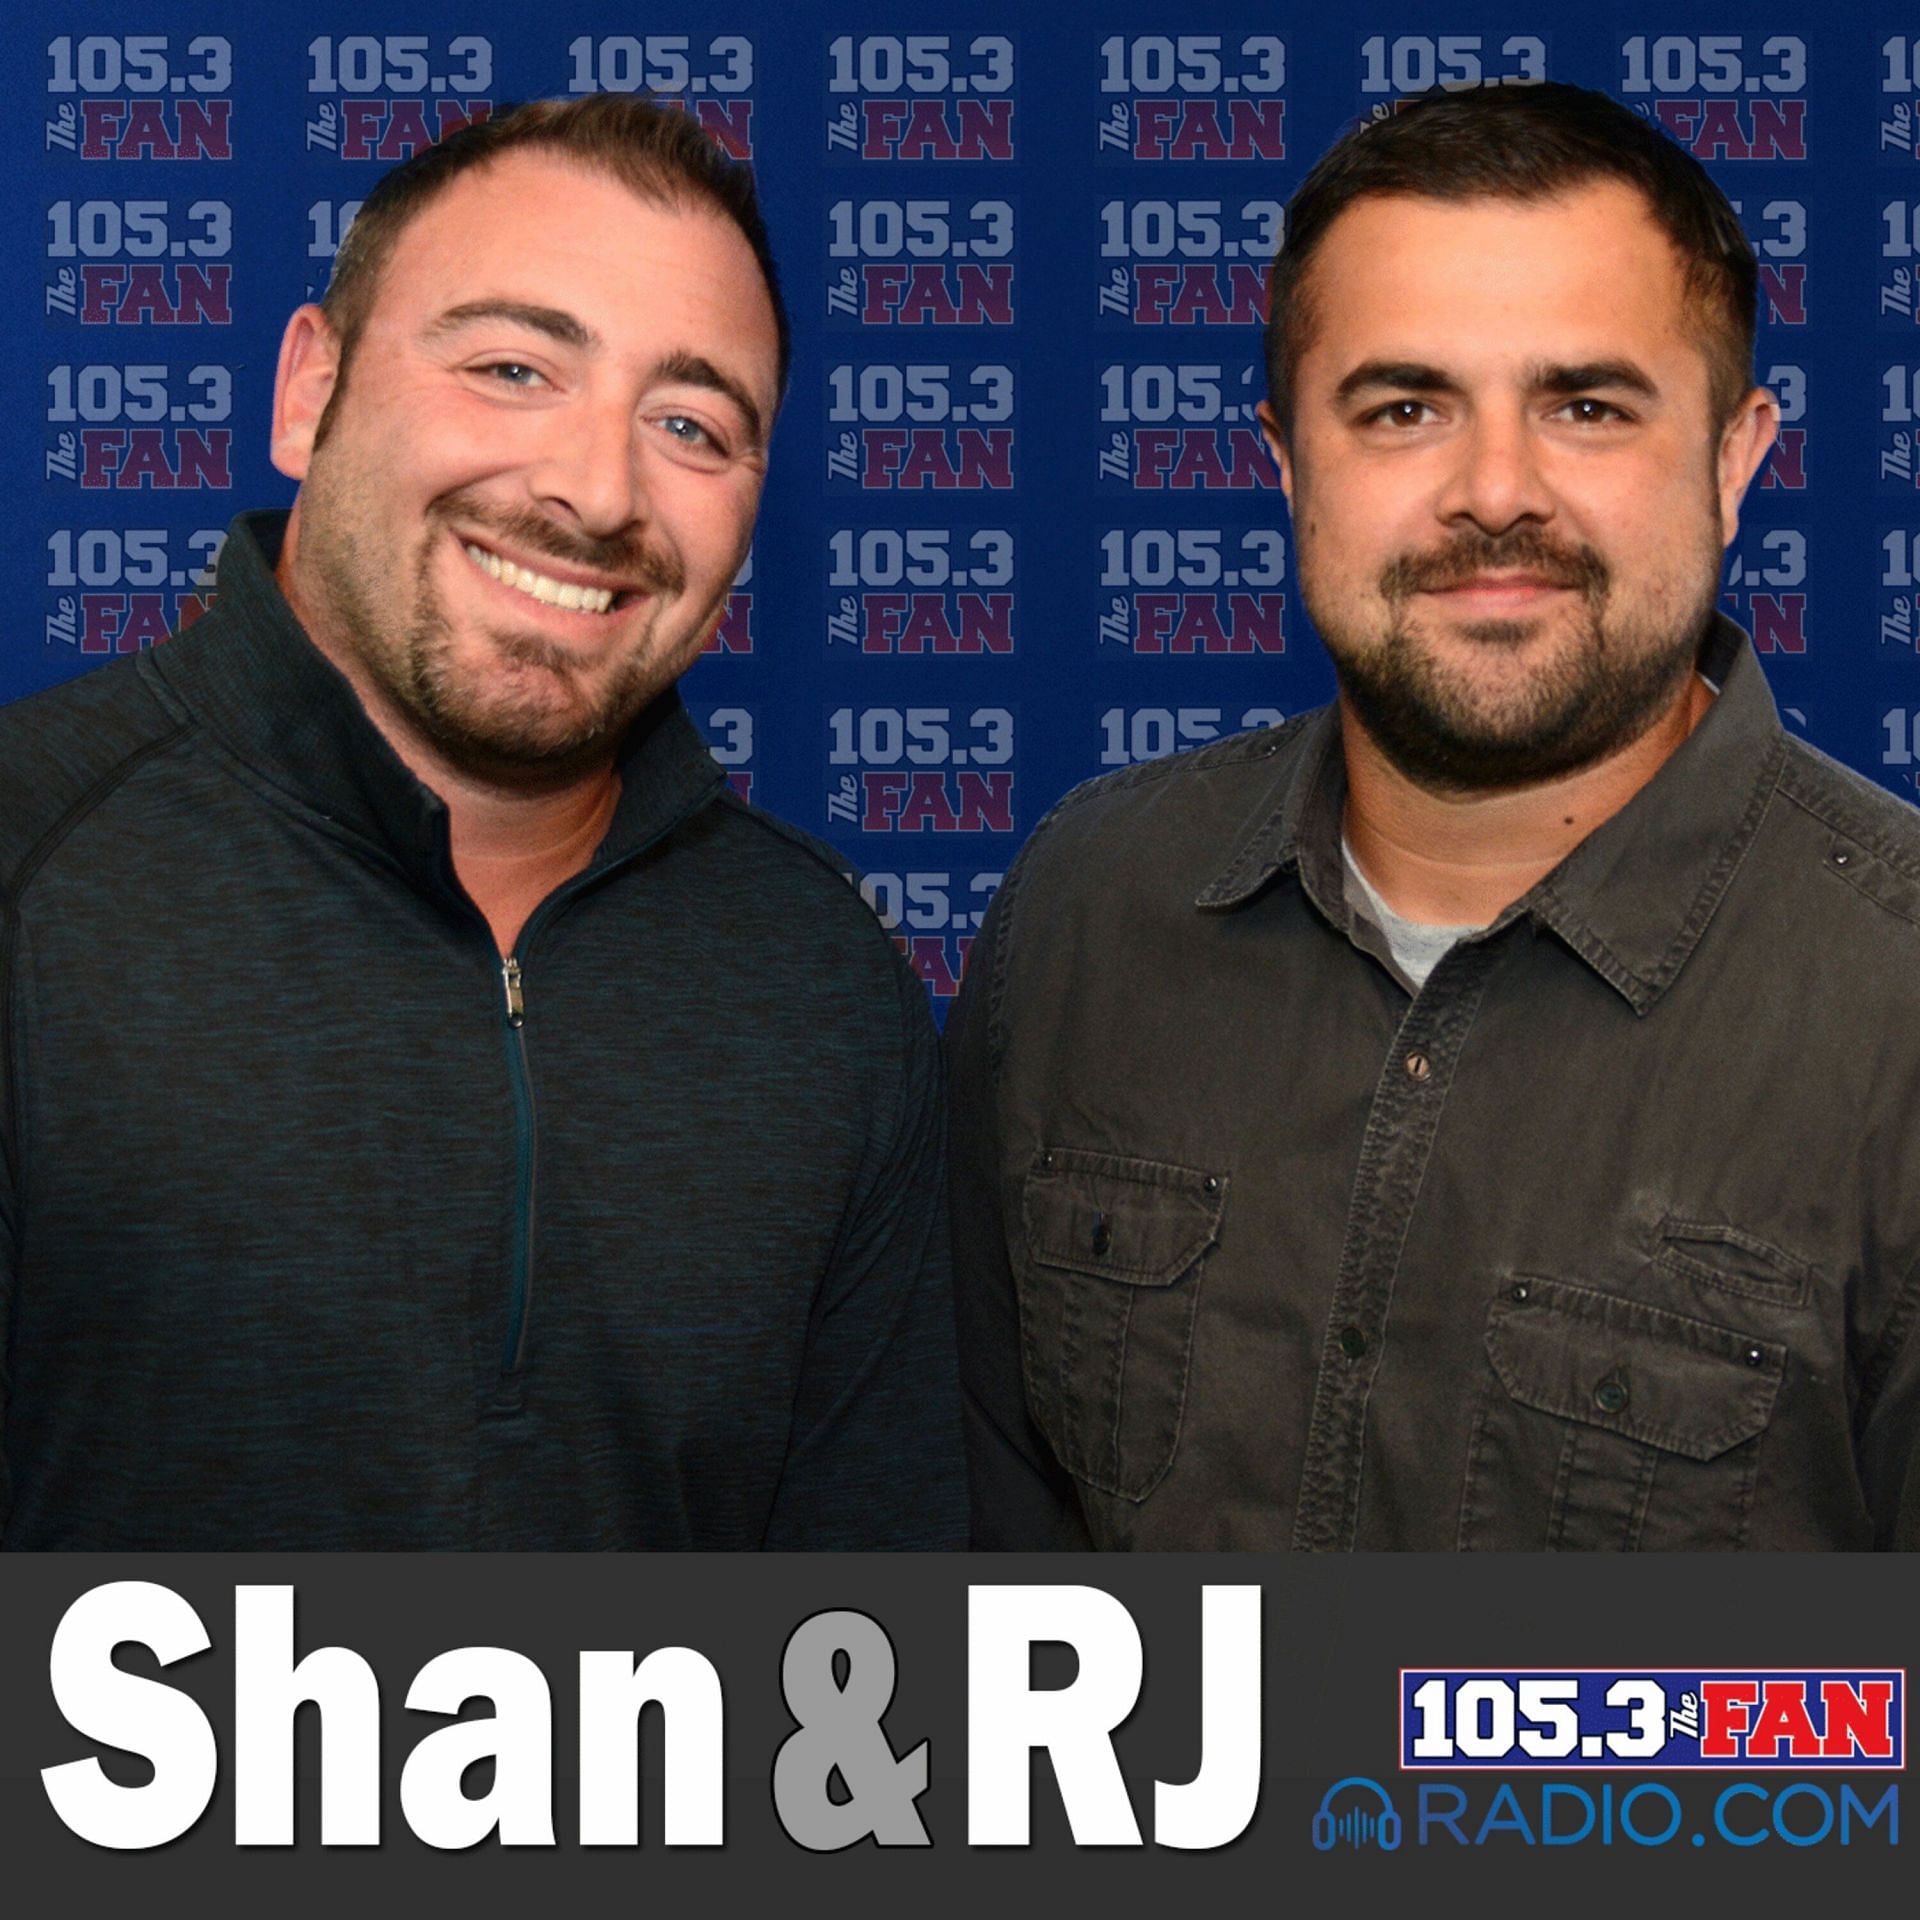 Shan Shariff&#039;s potential trade that could see QBs Dak Prescott and Aaron Rodgers go in opposite directions (Image Courtesy of Audacy.com via 105.3 The Fan /KRLD-FM)